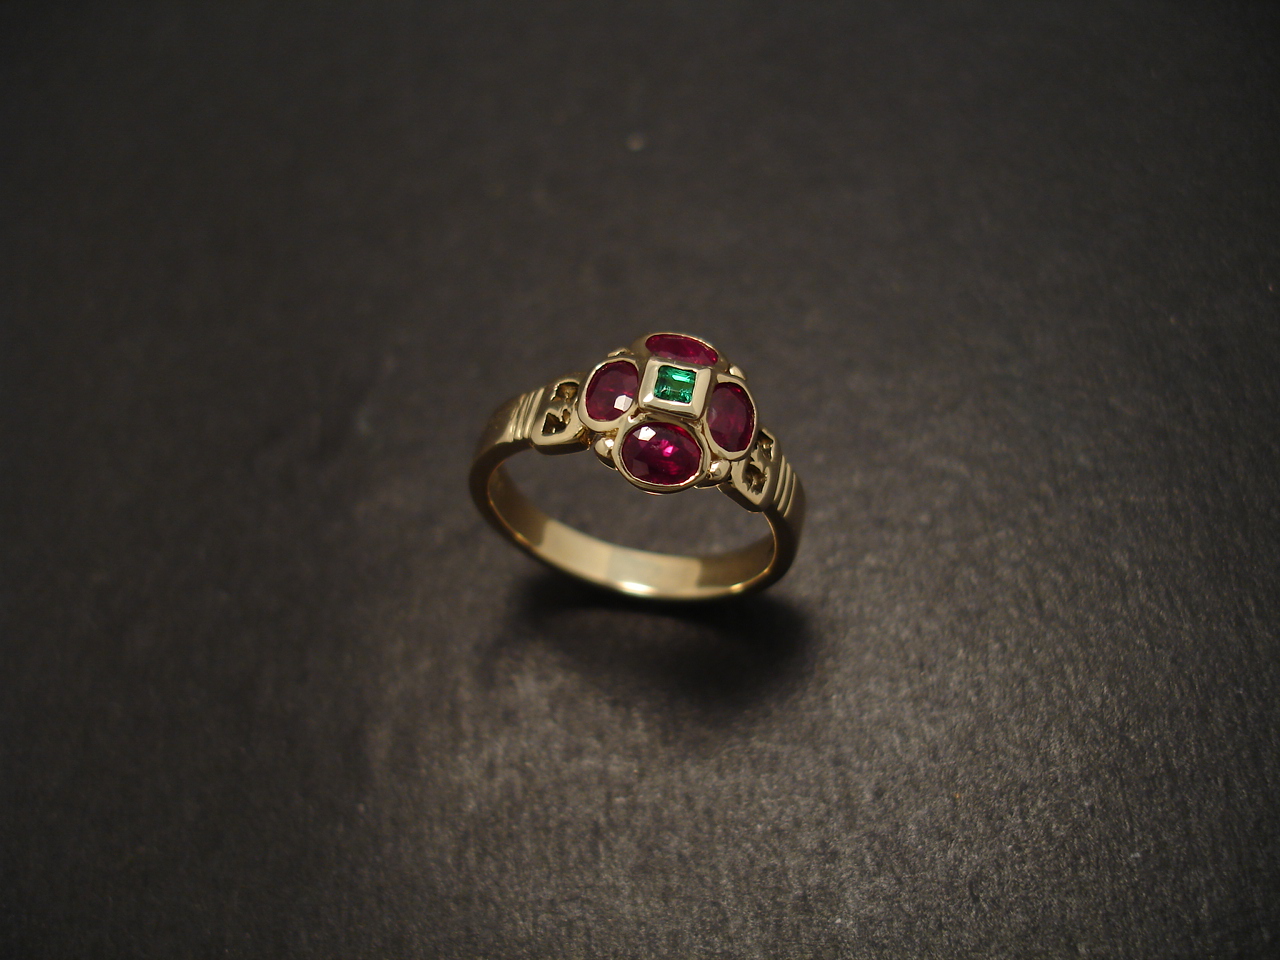 Rubies, Emerald and Gold Ring - Christopher William Sydney Australia